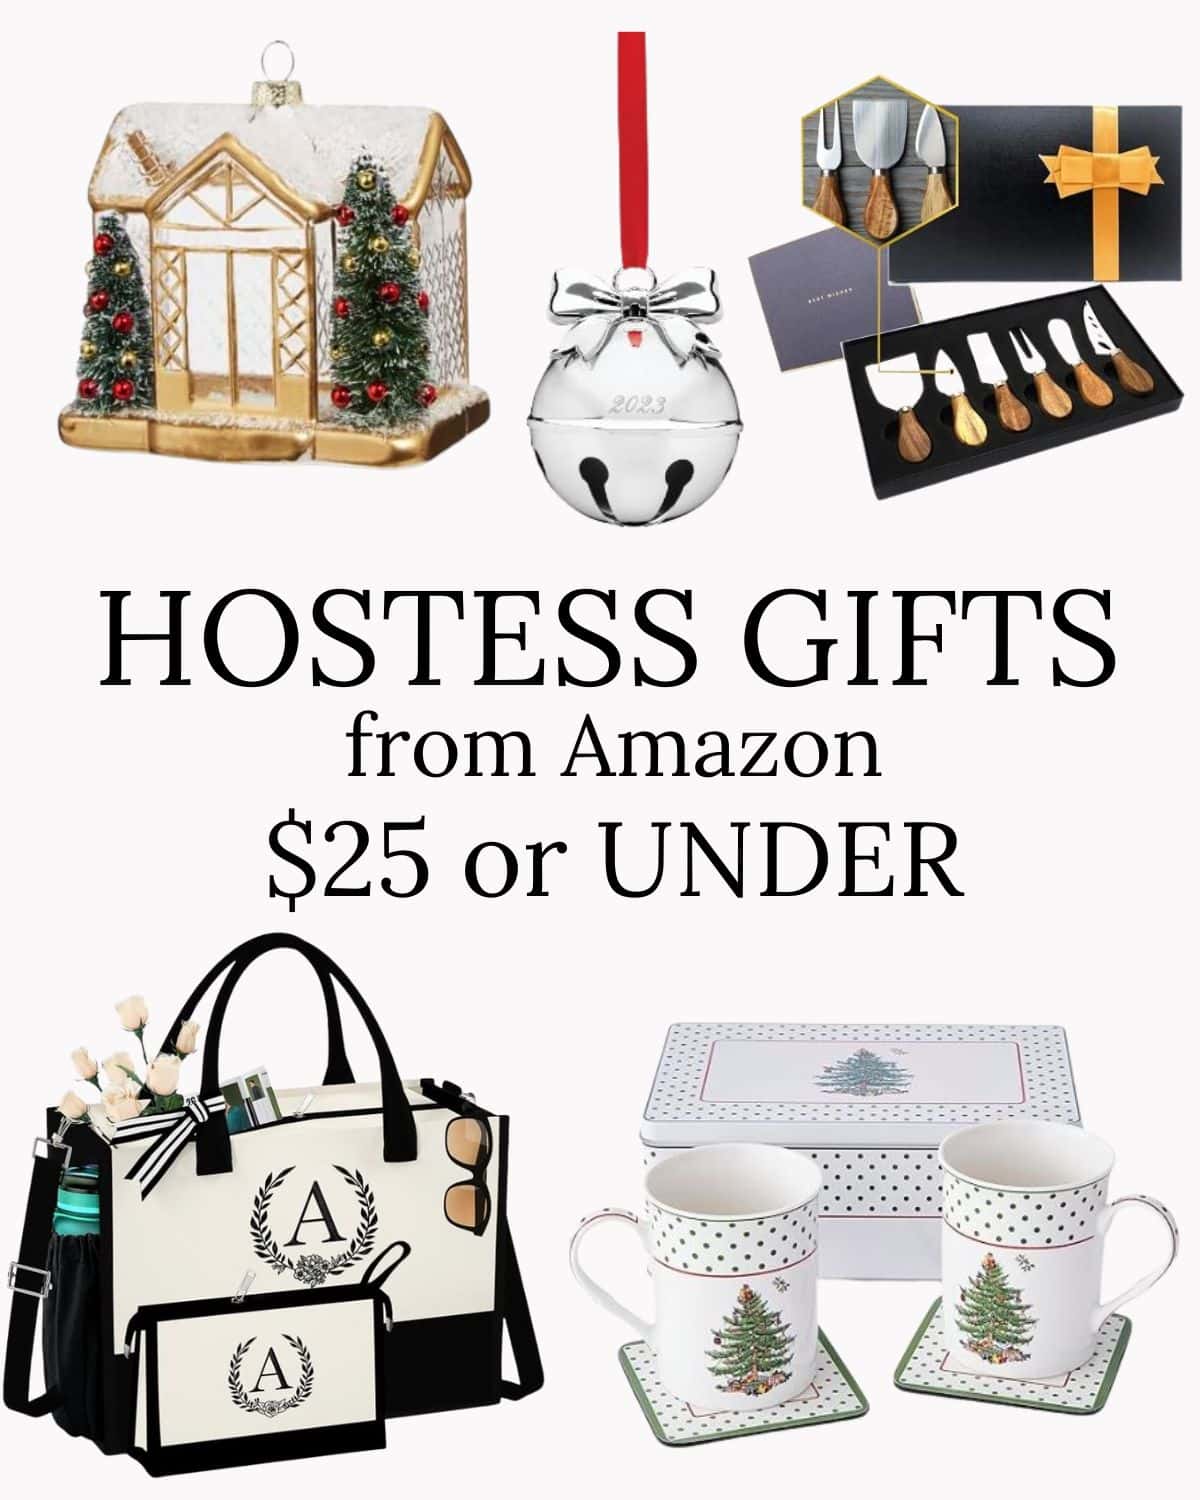 Hostess Gifts From Amazon Under $25 - Worthing Court | DIY Home Decor ...